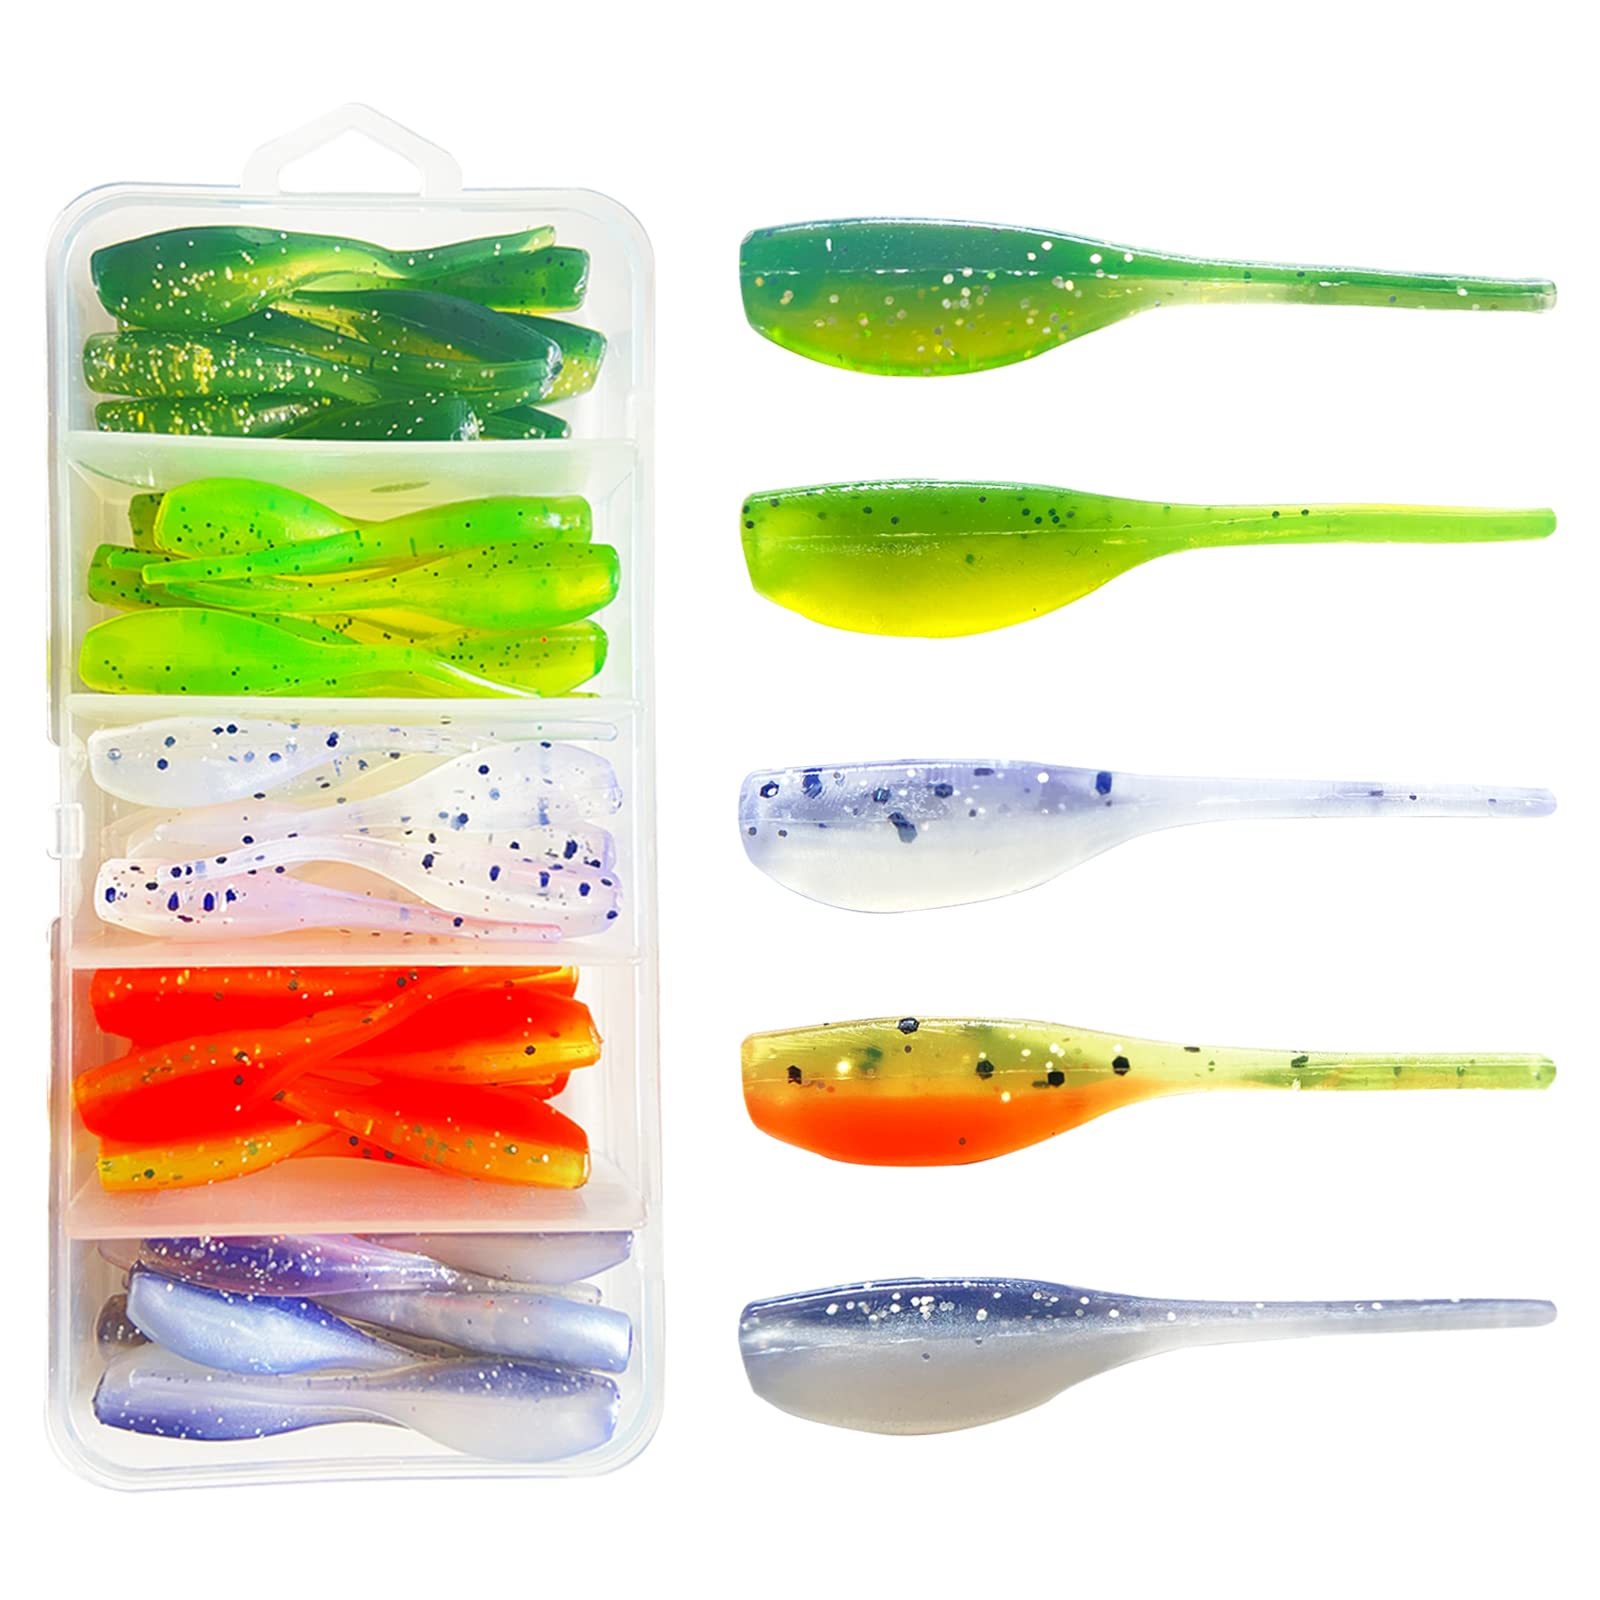 50Pcs Crappie Jigs Lure Set 2 inch Crappie Bait Crappie Jig Heads Hooks  Fishing Lures for Crappie C:50pcs crappie lures